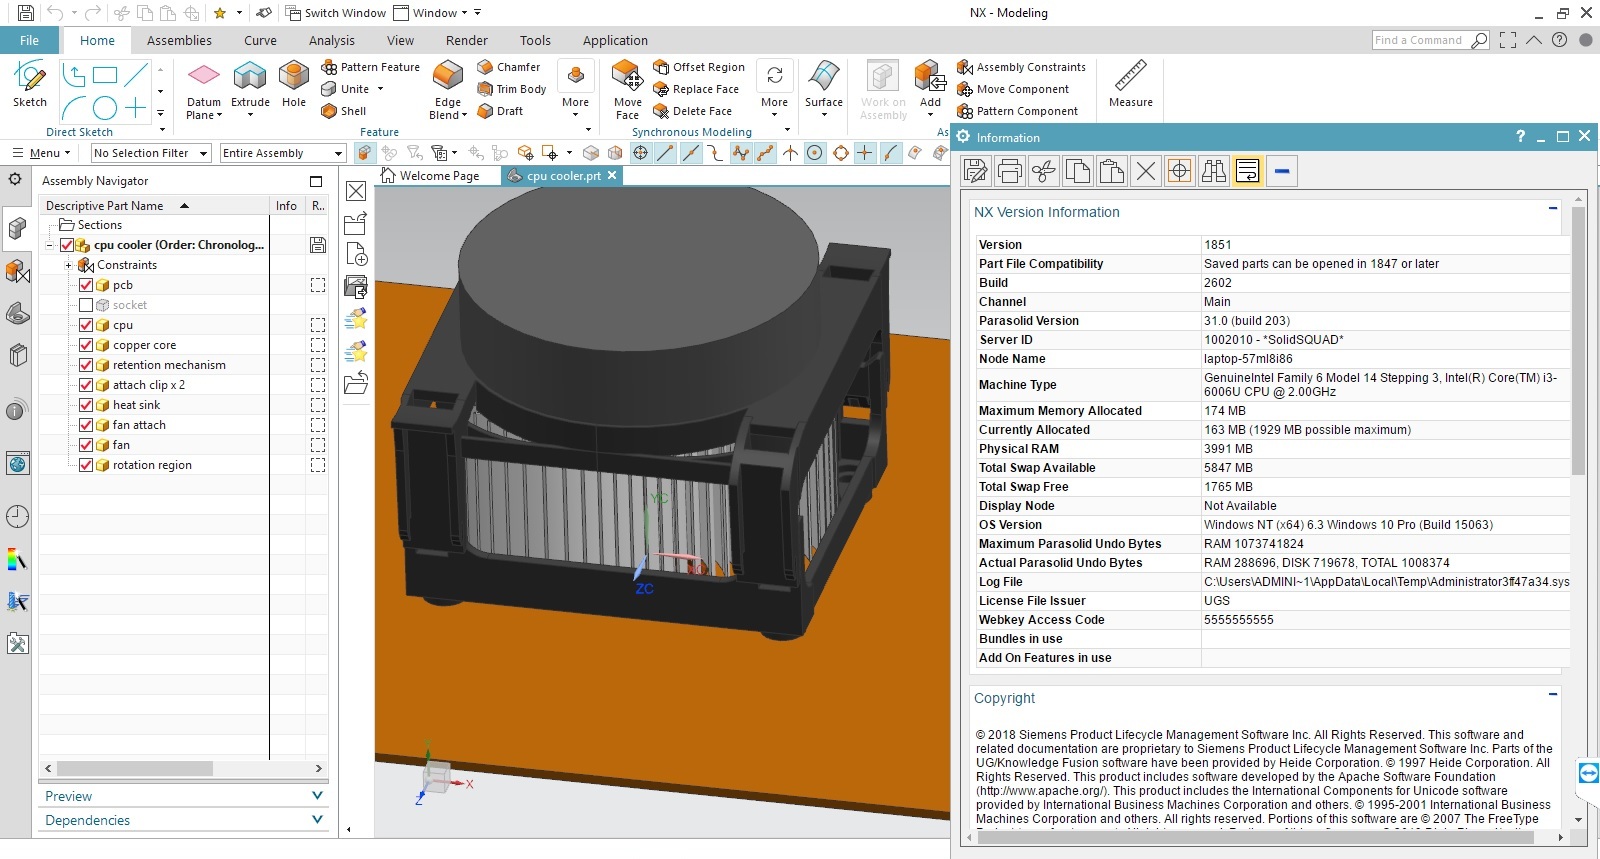 Design with Siemens NX 1851 Win64 full license